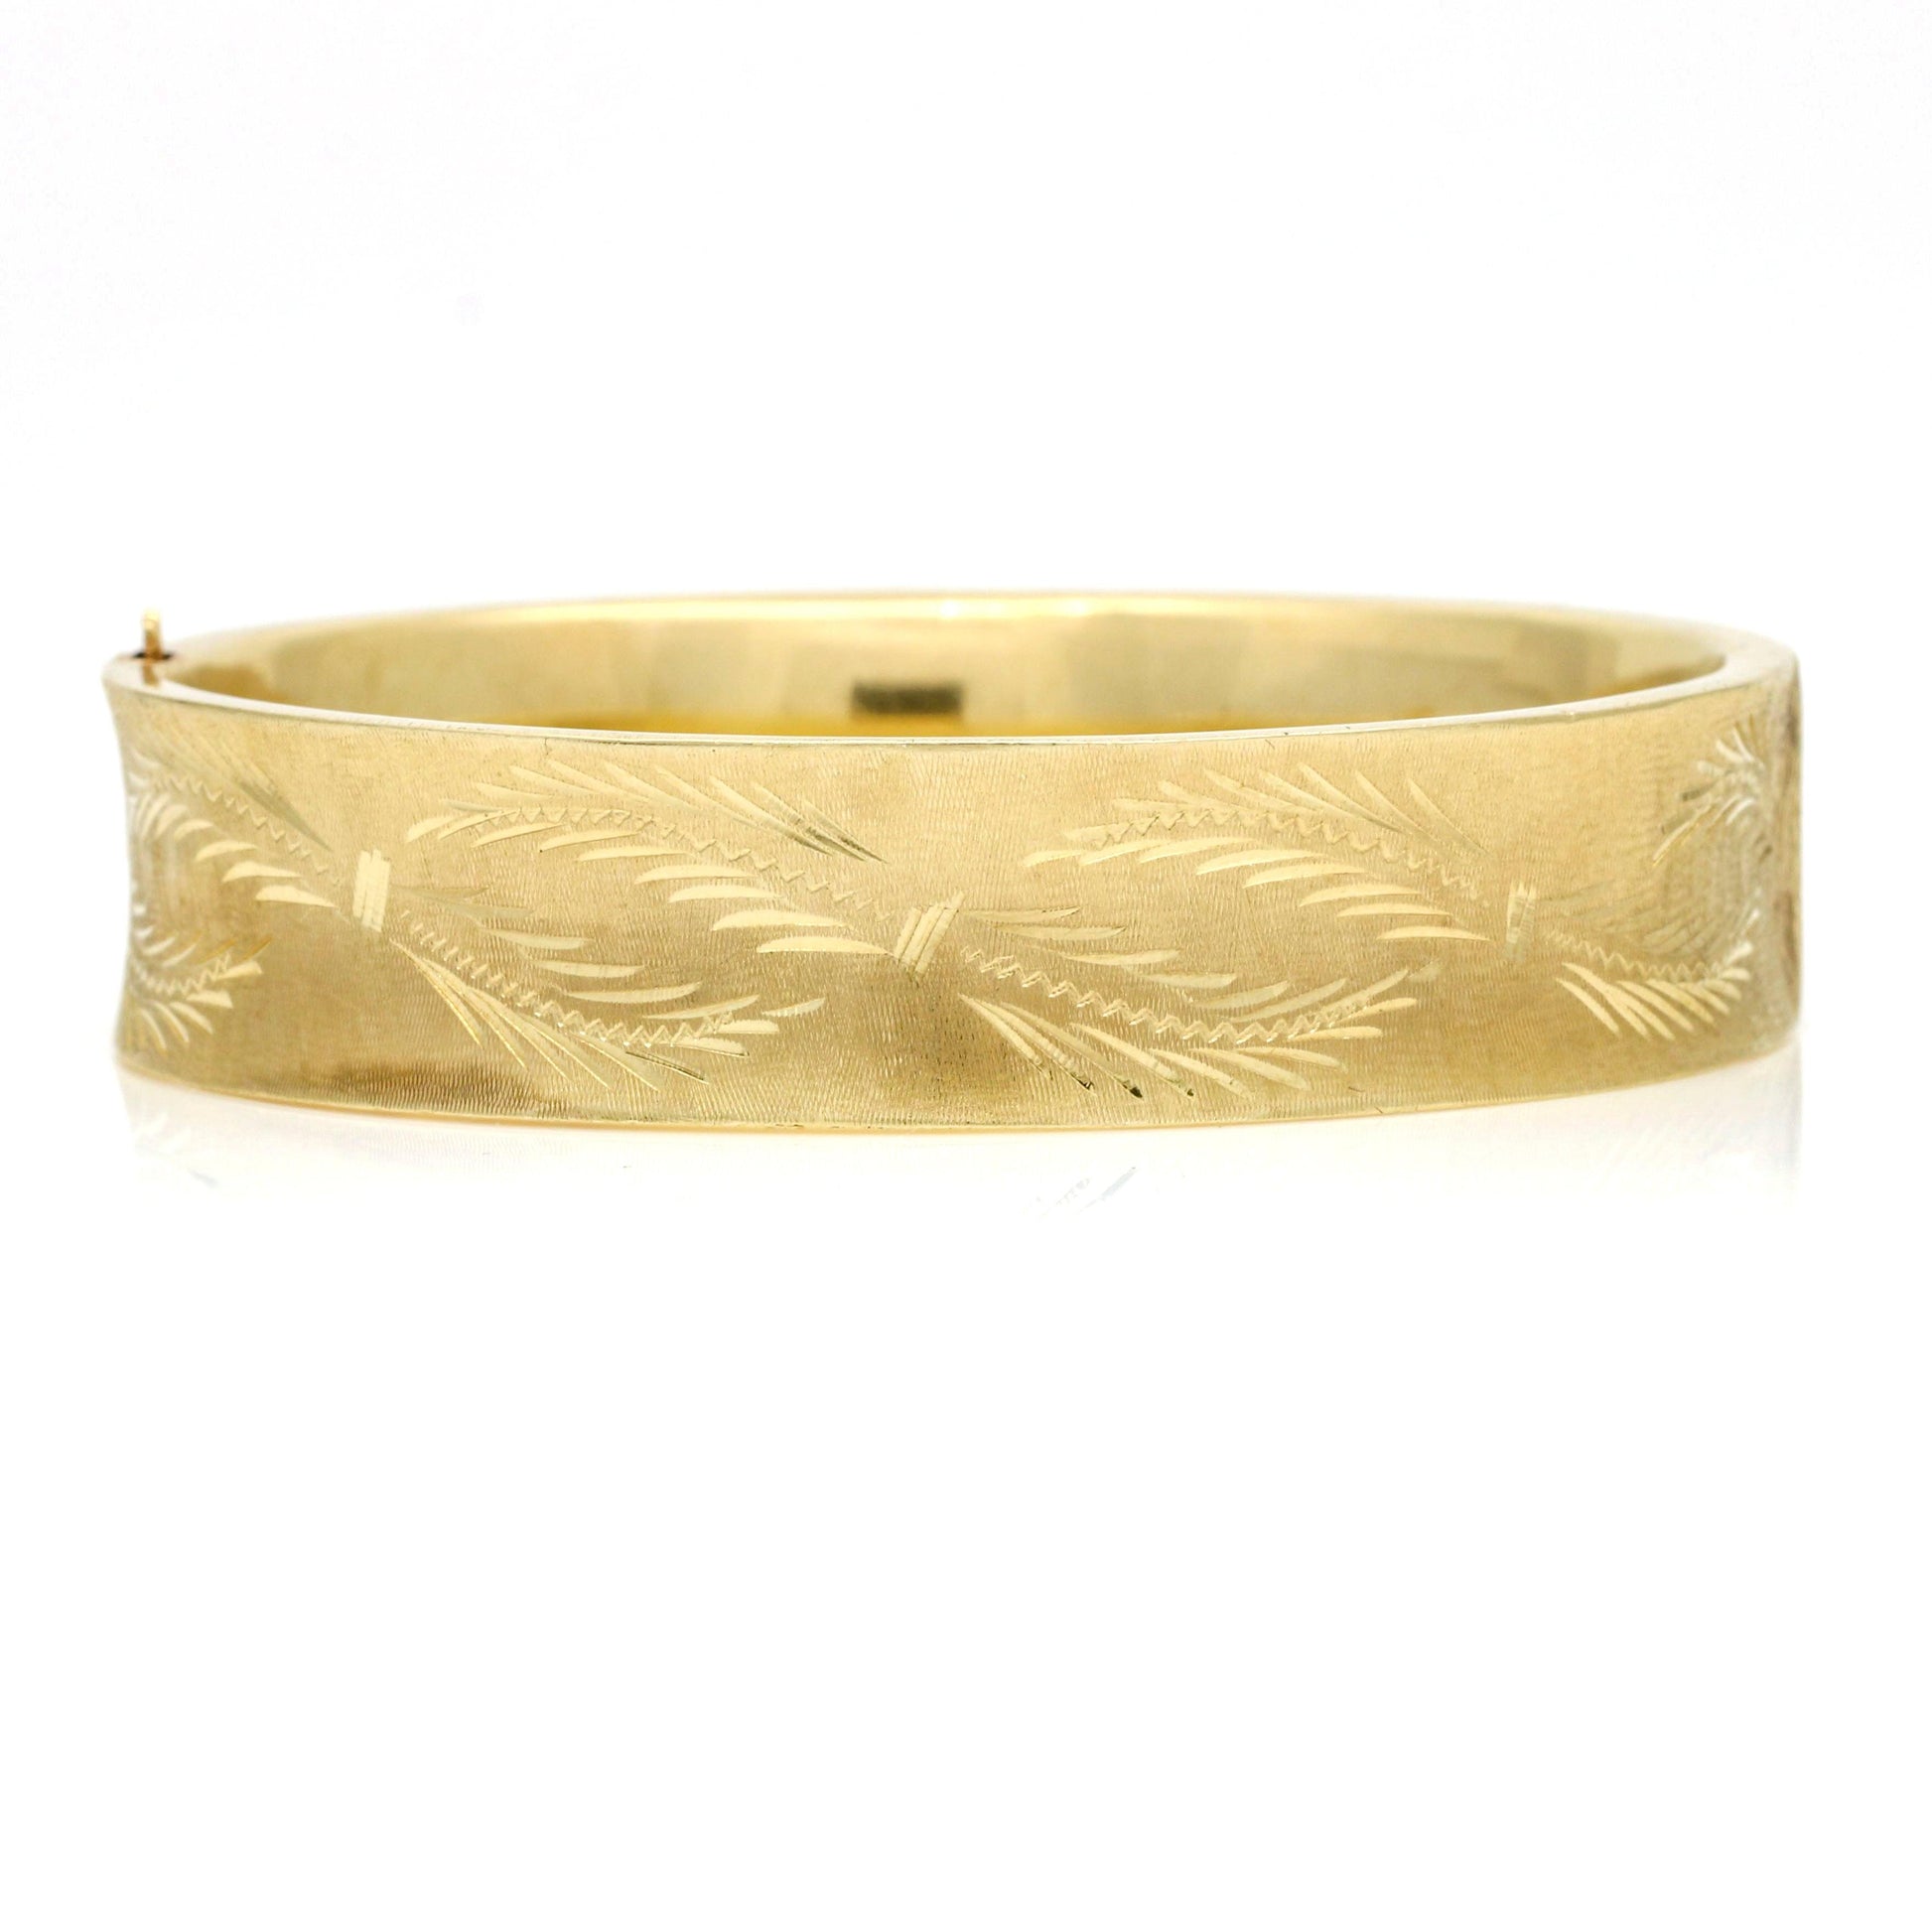 Women's Concave Hinged Bangle Bracelet in 14k Yellow Gold - 31 Jewels Inc.